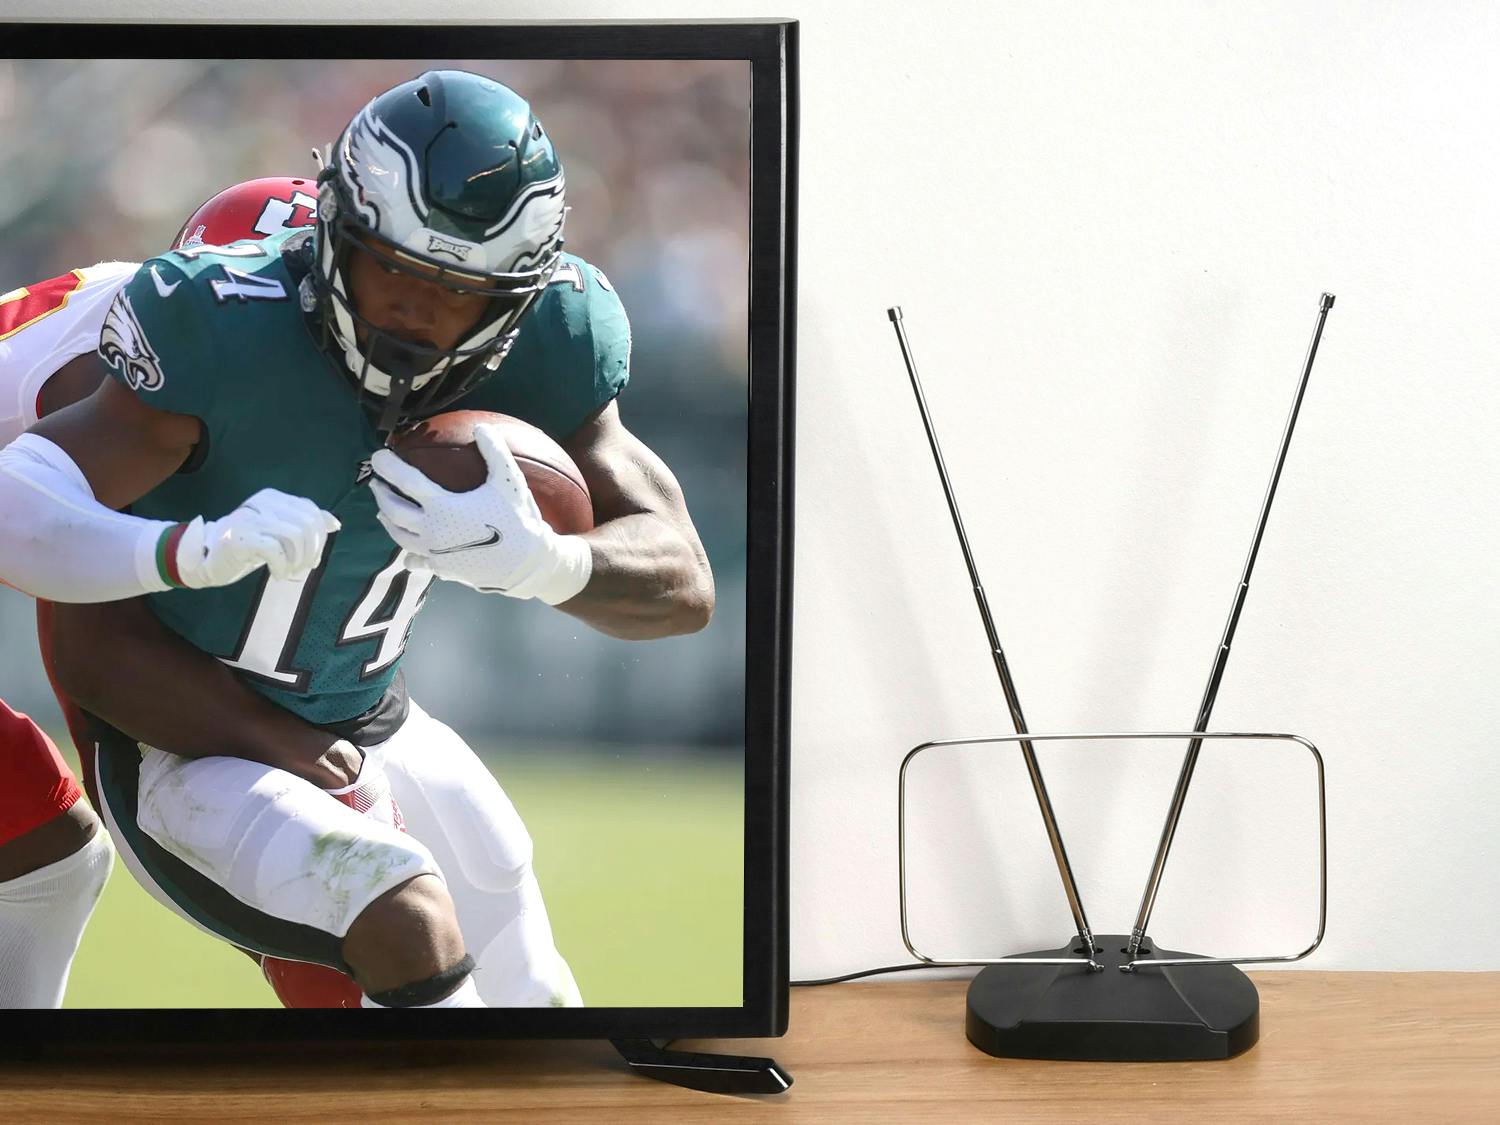 How to Watch the Super Bowl For Free Without Cable - The Krazy Coupon Lady